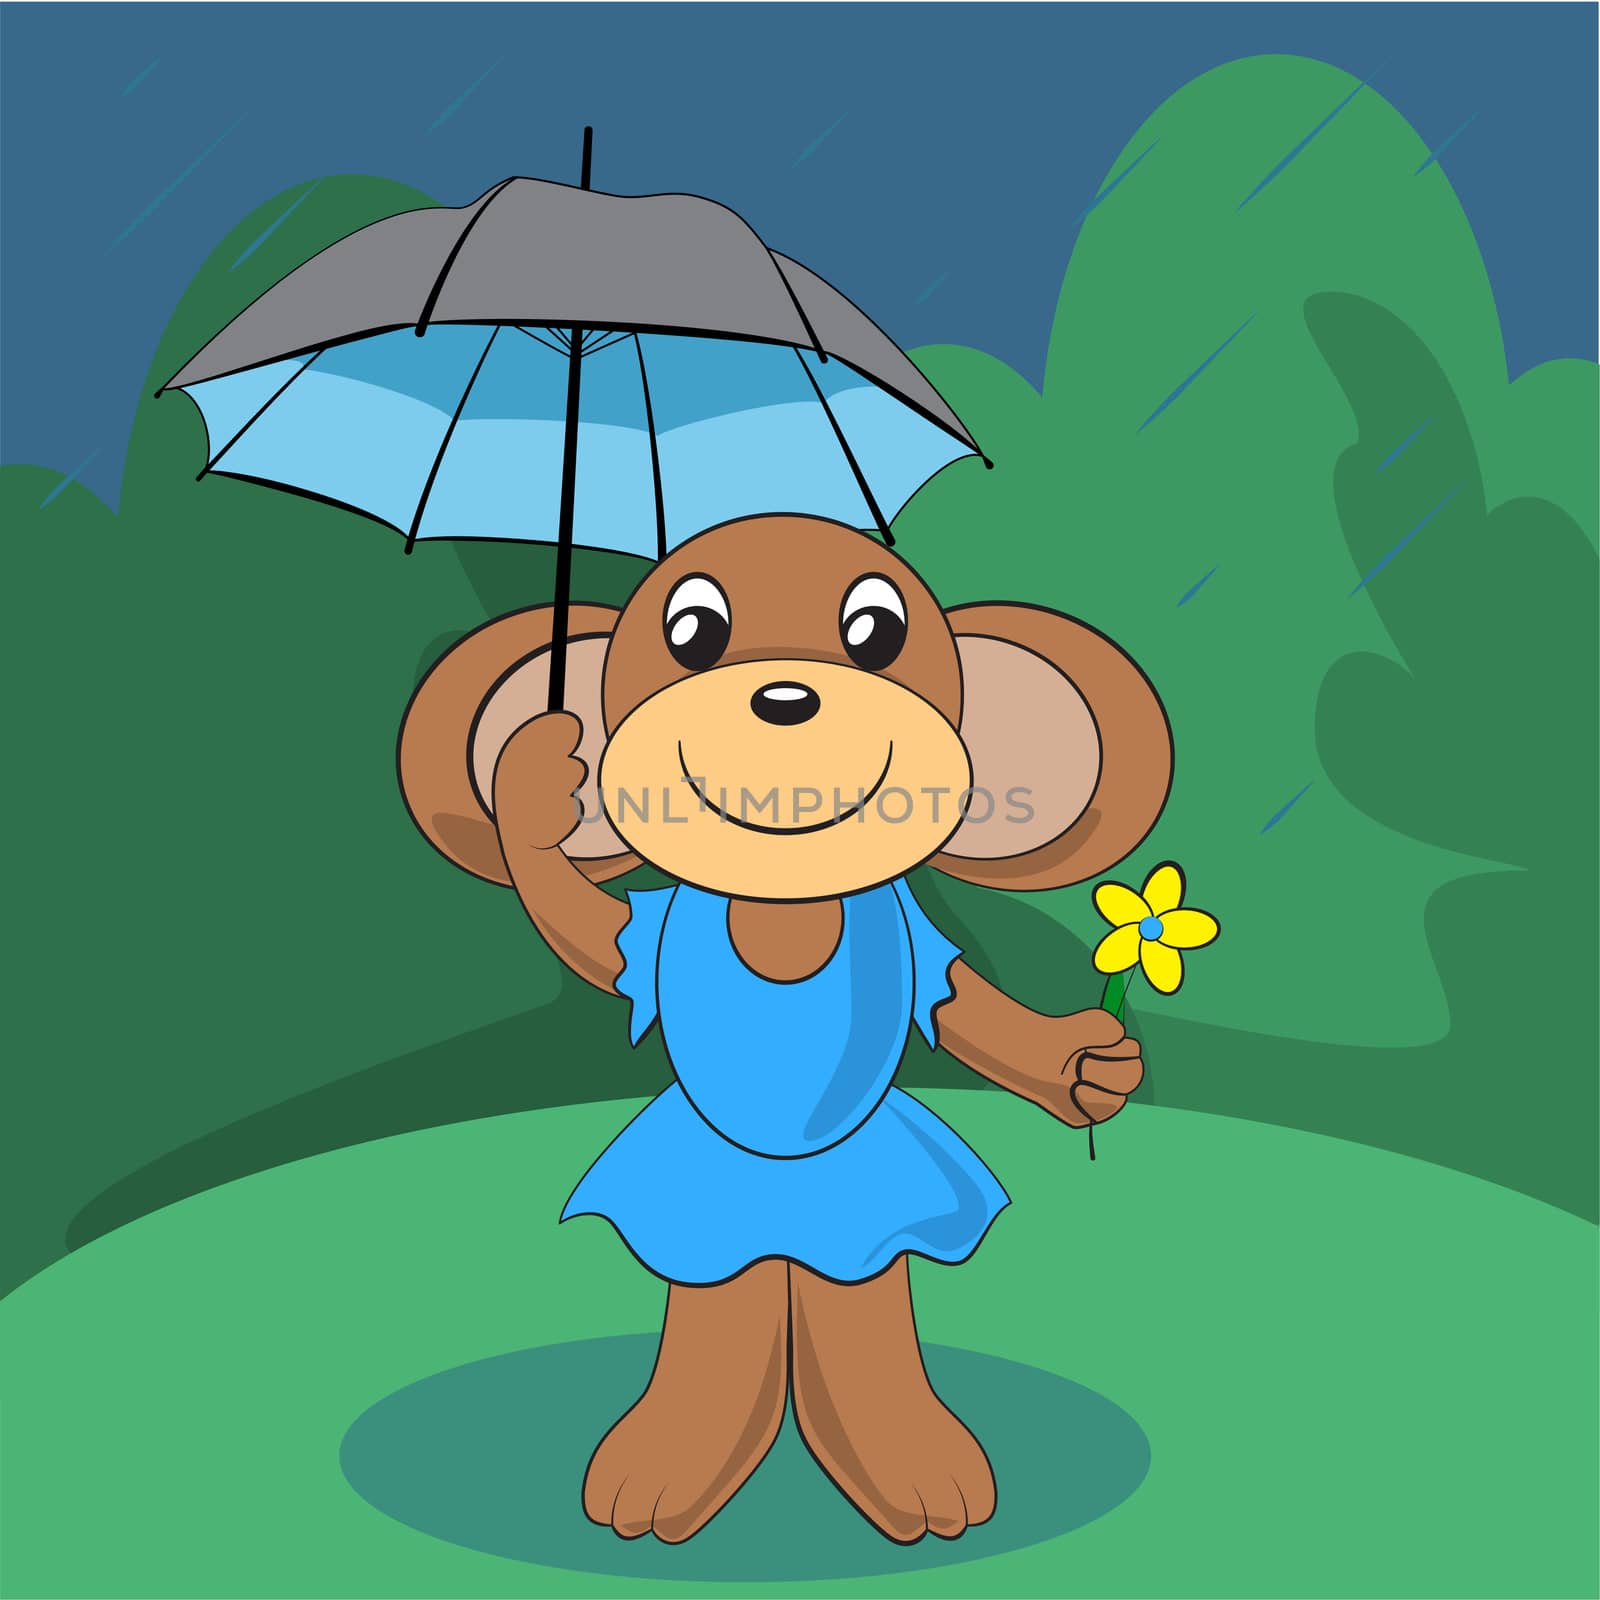 Cute monkey standing on green meadow with a flower and an umbrella in the rain. illustration